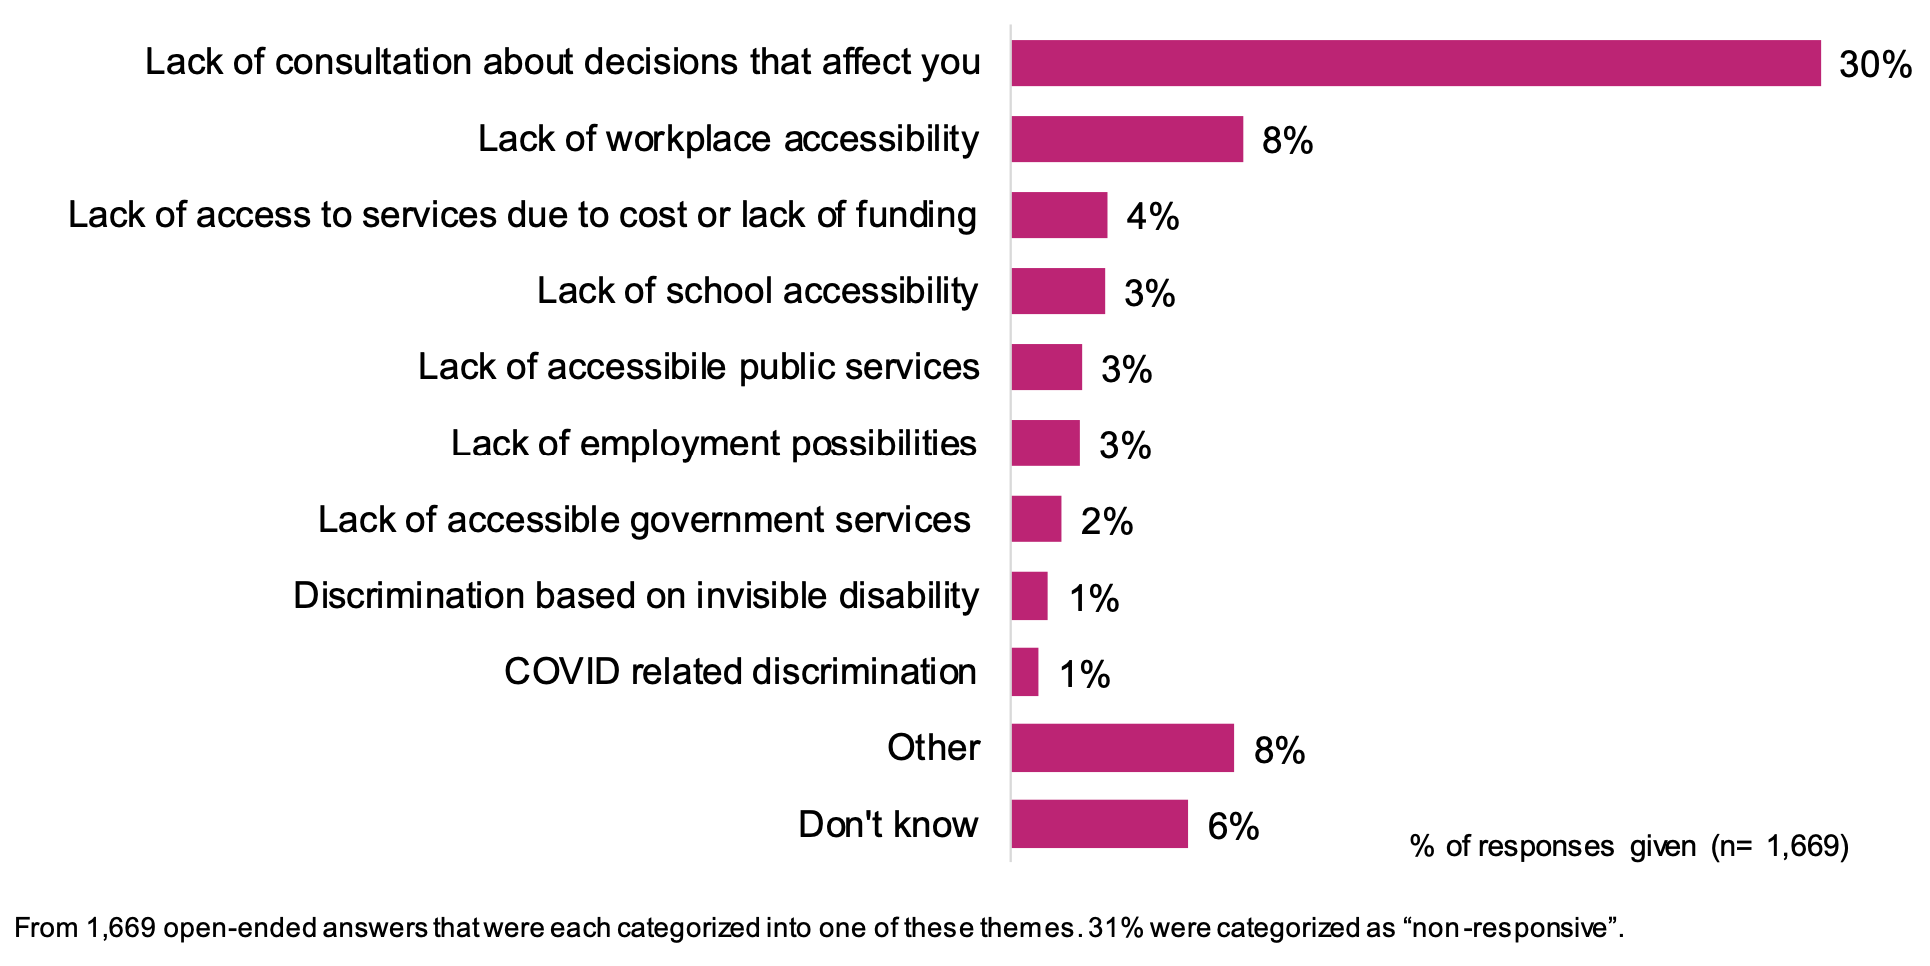 This is a bar chart of examples where people were unable, not comfortable, or not asked to take part in decision-making about an issue that affected them.